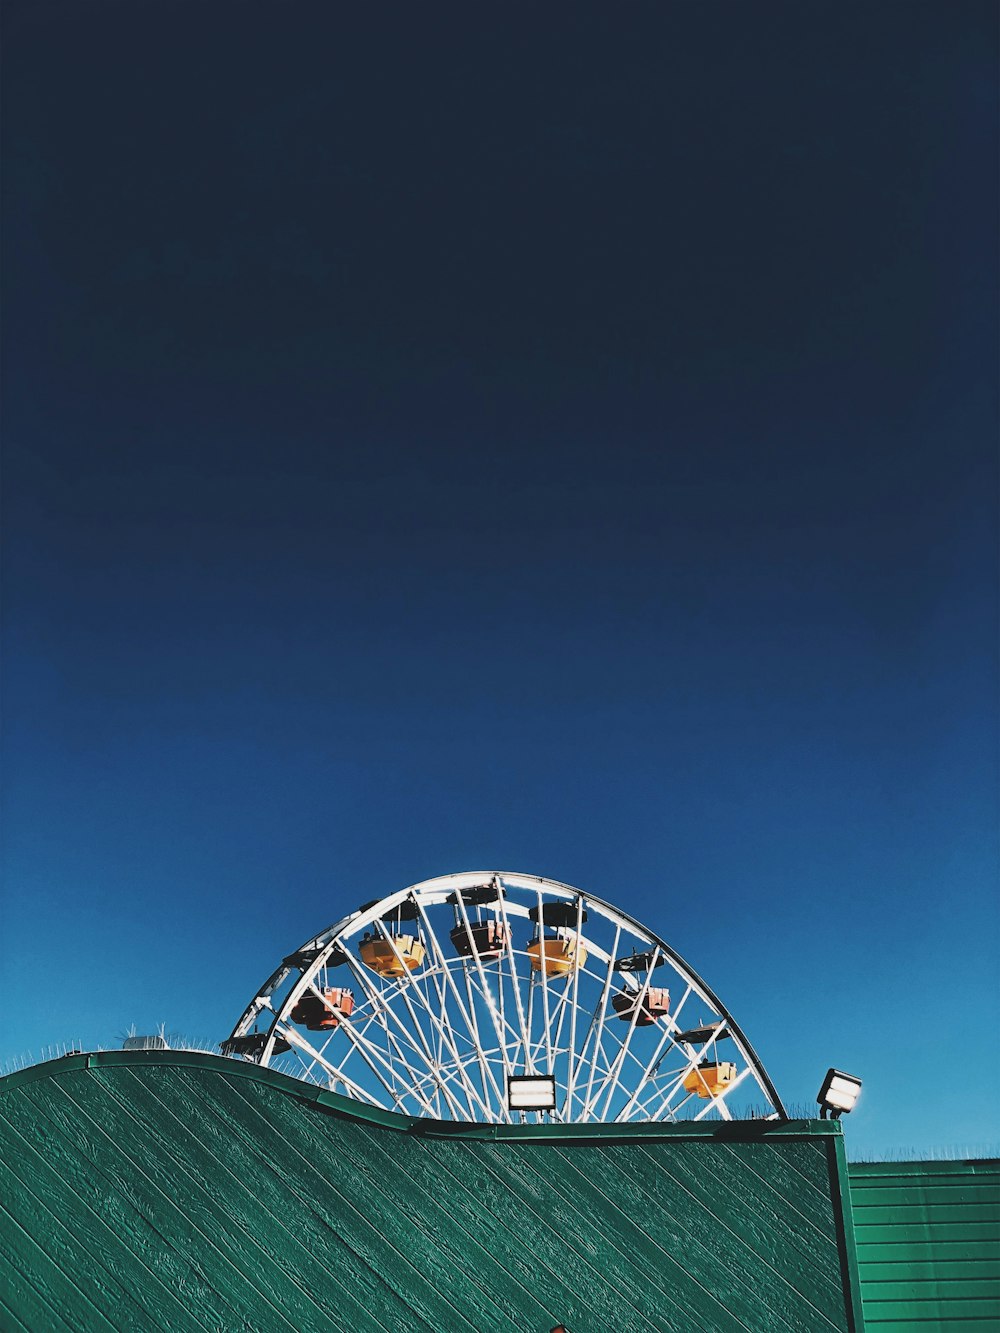 green and white ferris wheel under blue sky during daytime